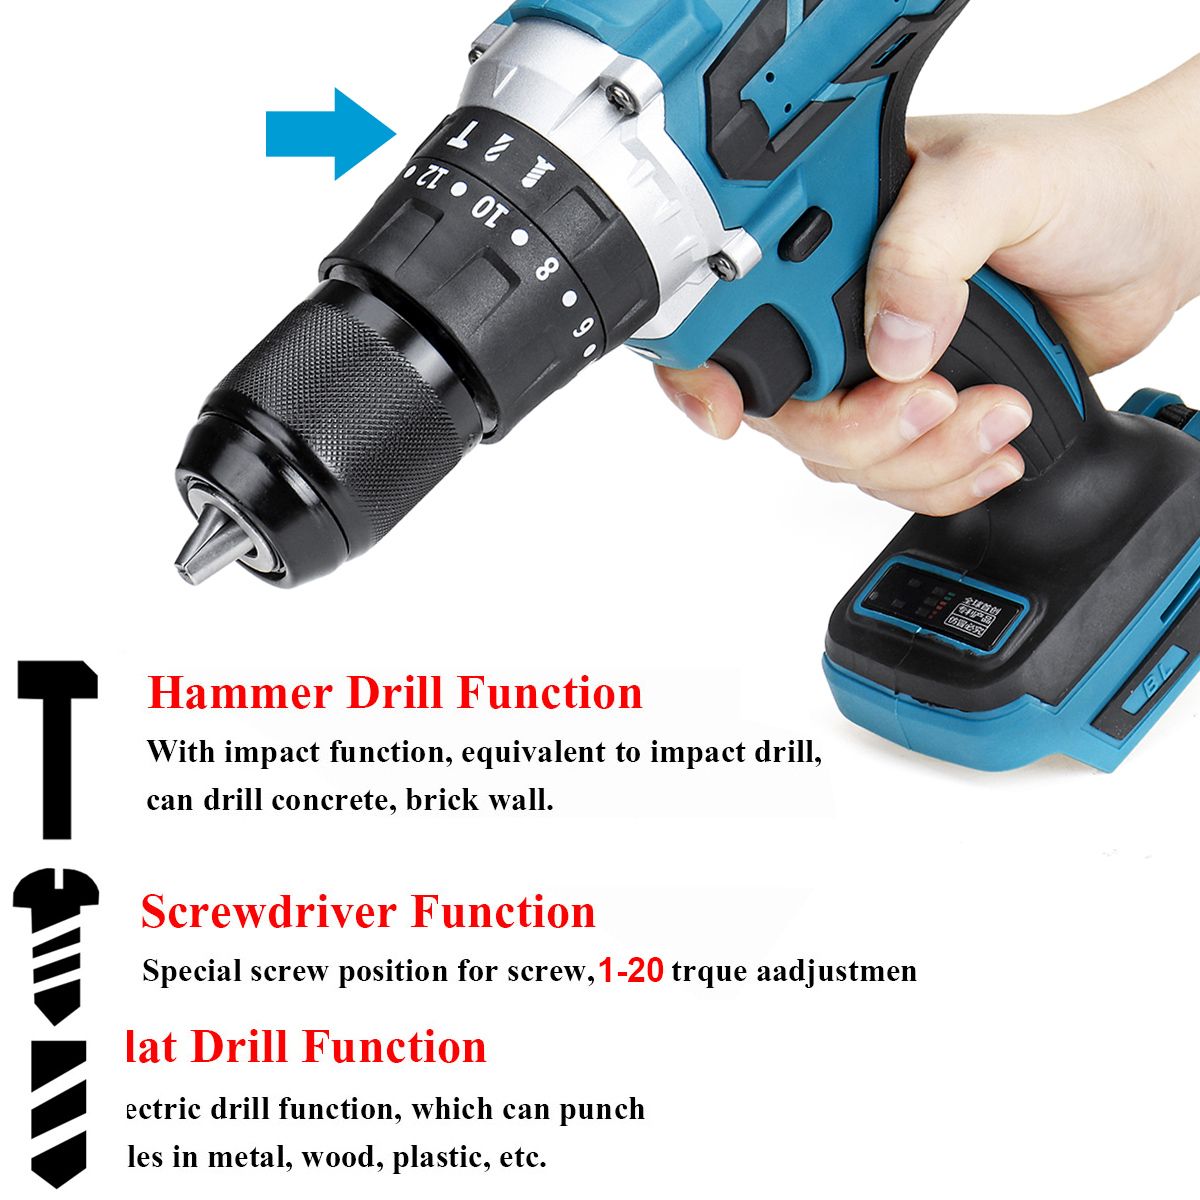 350Nm-3-In-1-Brushless-Drill-Brushless-Impact-Drill-Driver-Hammer-Adapted-To-18V-Makita-Battery-1698395